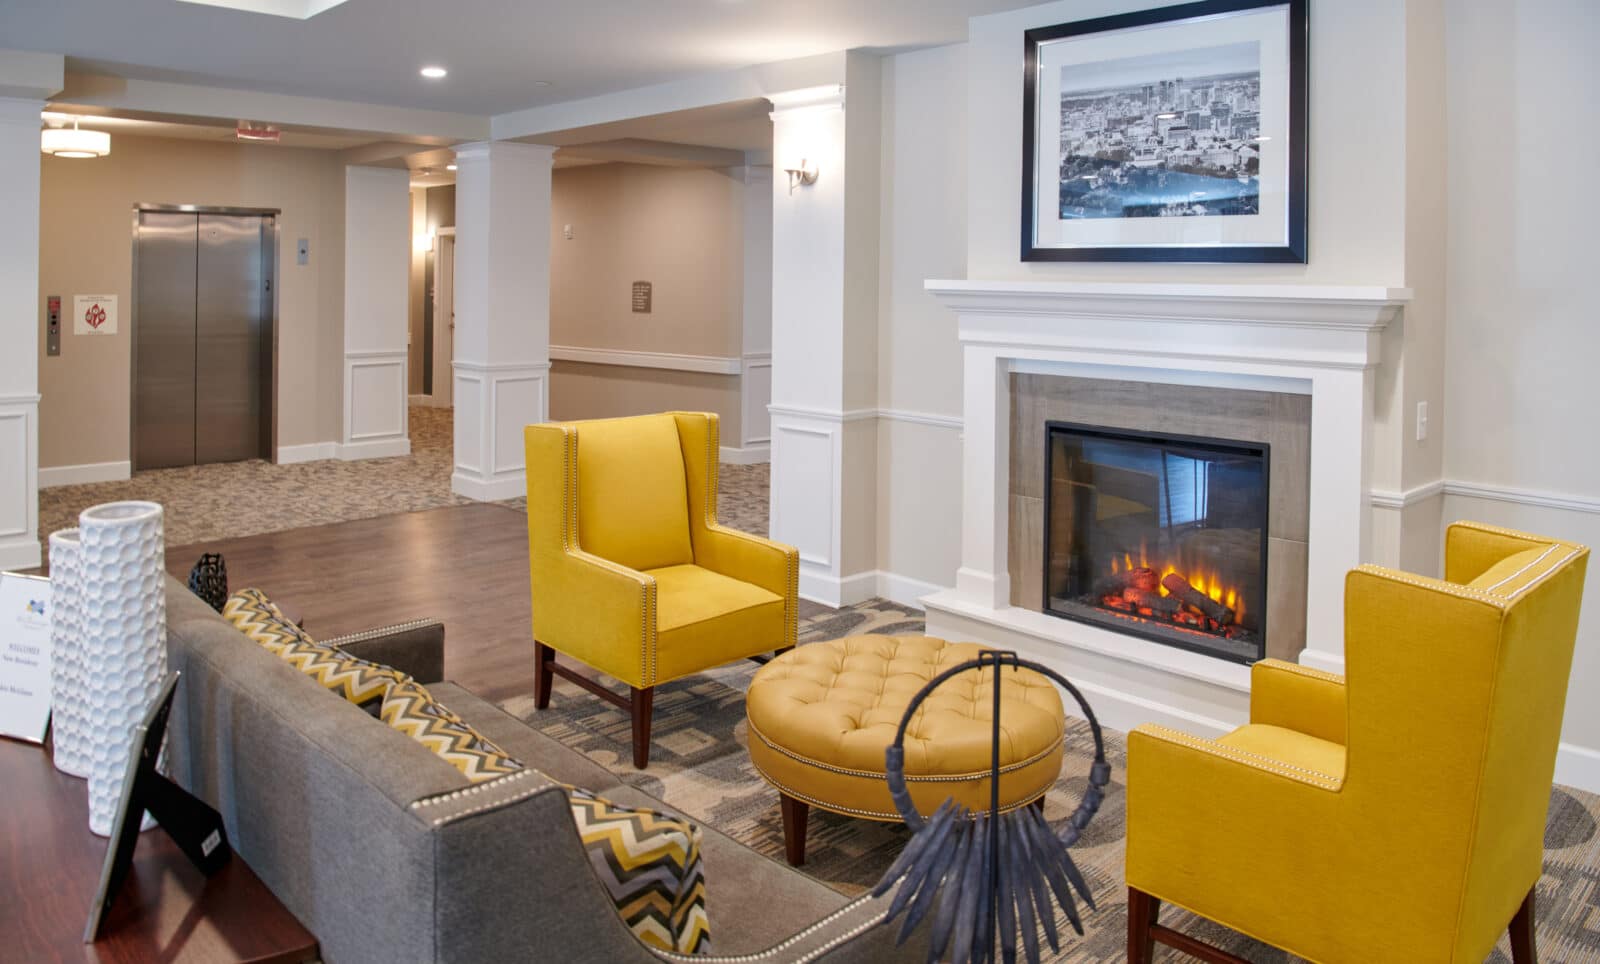 fireplace with yellow chairs, round ottoman and couch with chevron pillows